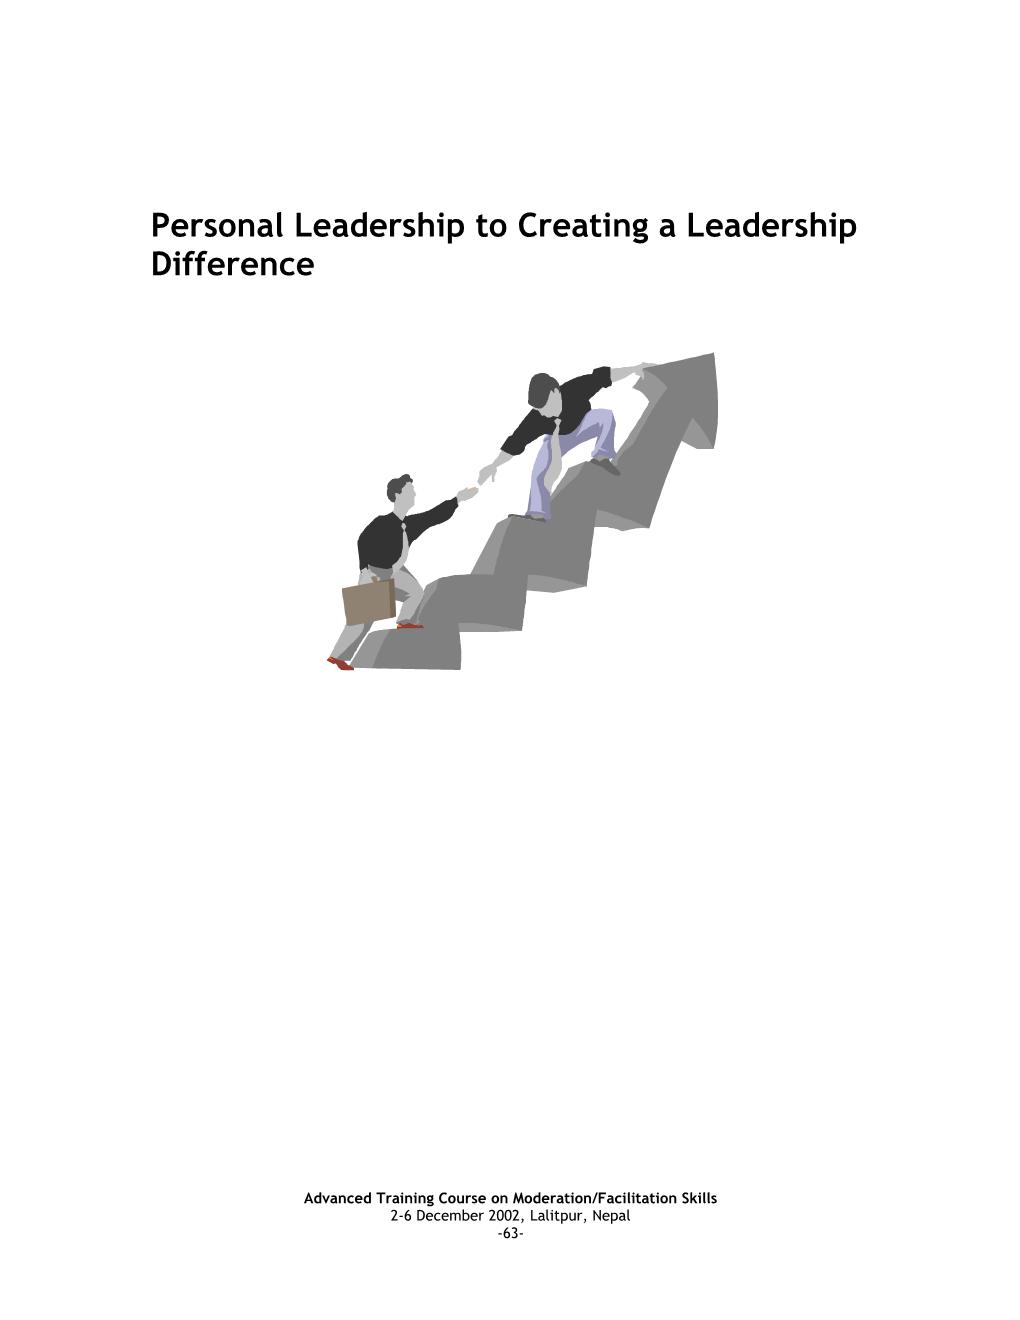 Personal Leadership to Creating a Leadership Difference